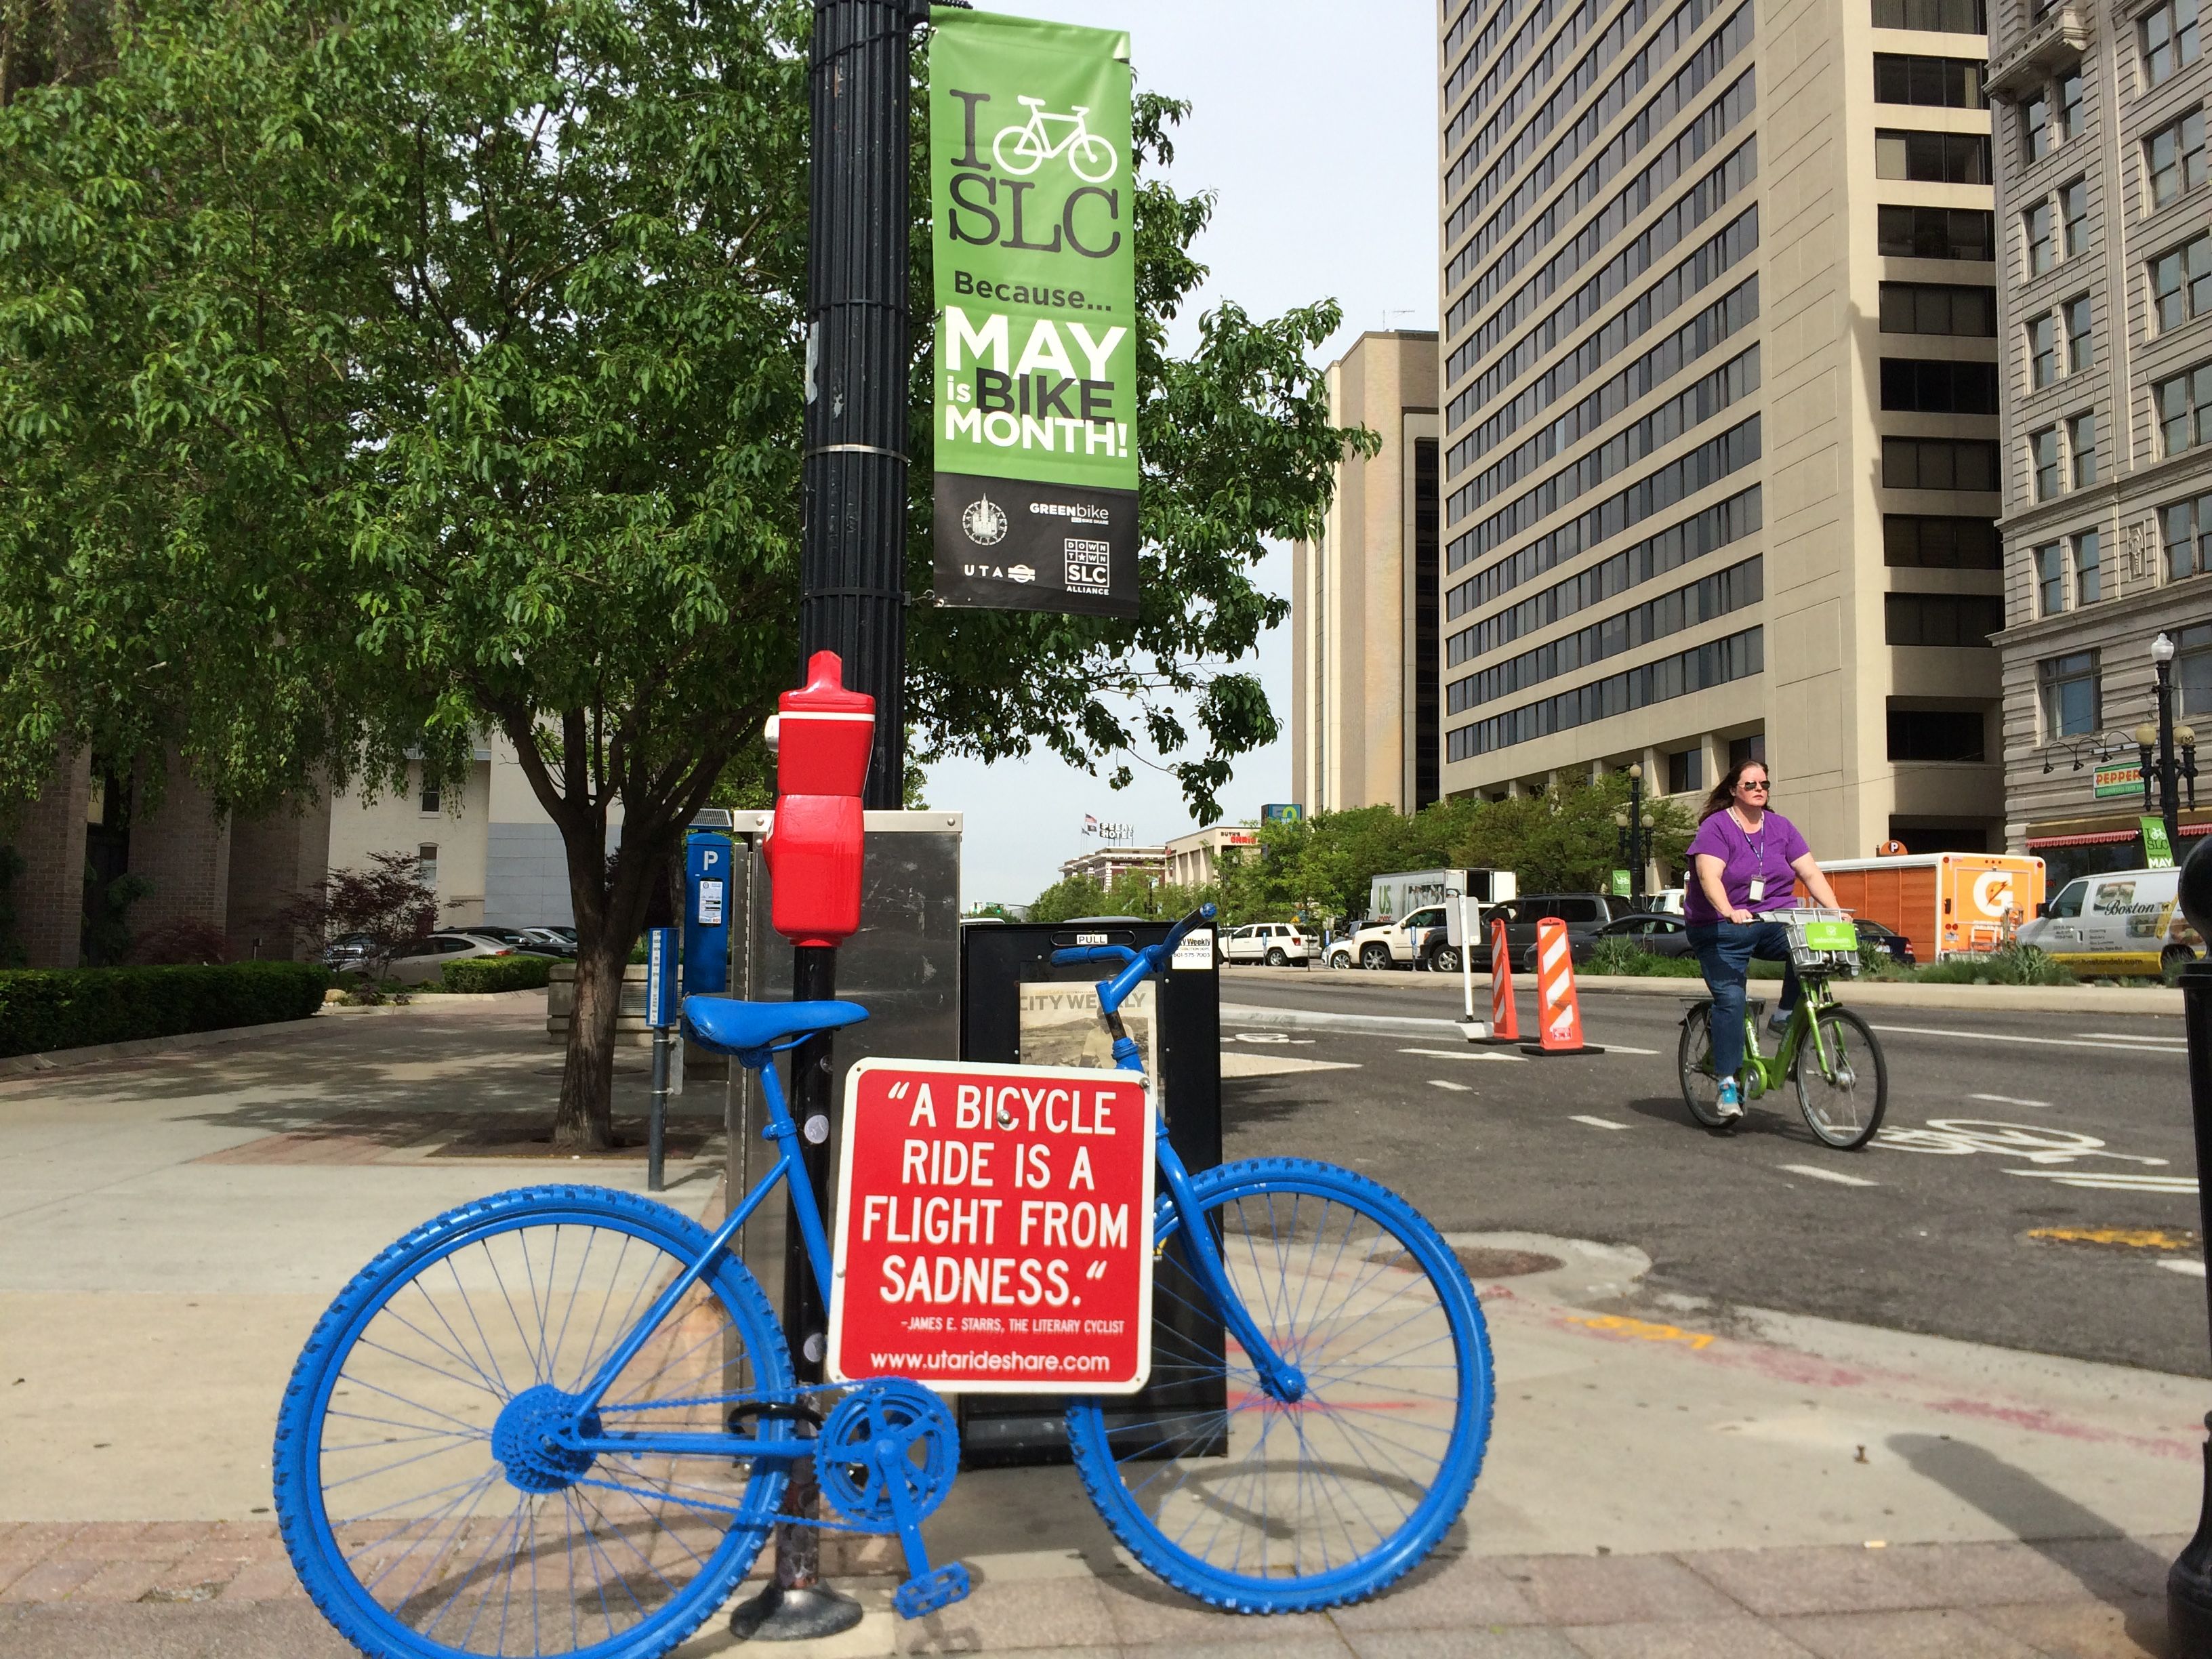 Salt Lake City has made great progress in cycling with GreenBike Bike Share, Bike Month events, and a new protected bike lane (with more to come). Photo by Dave Iltis